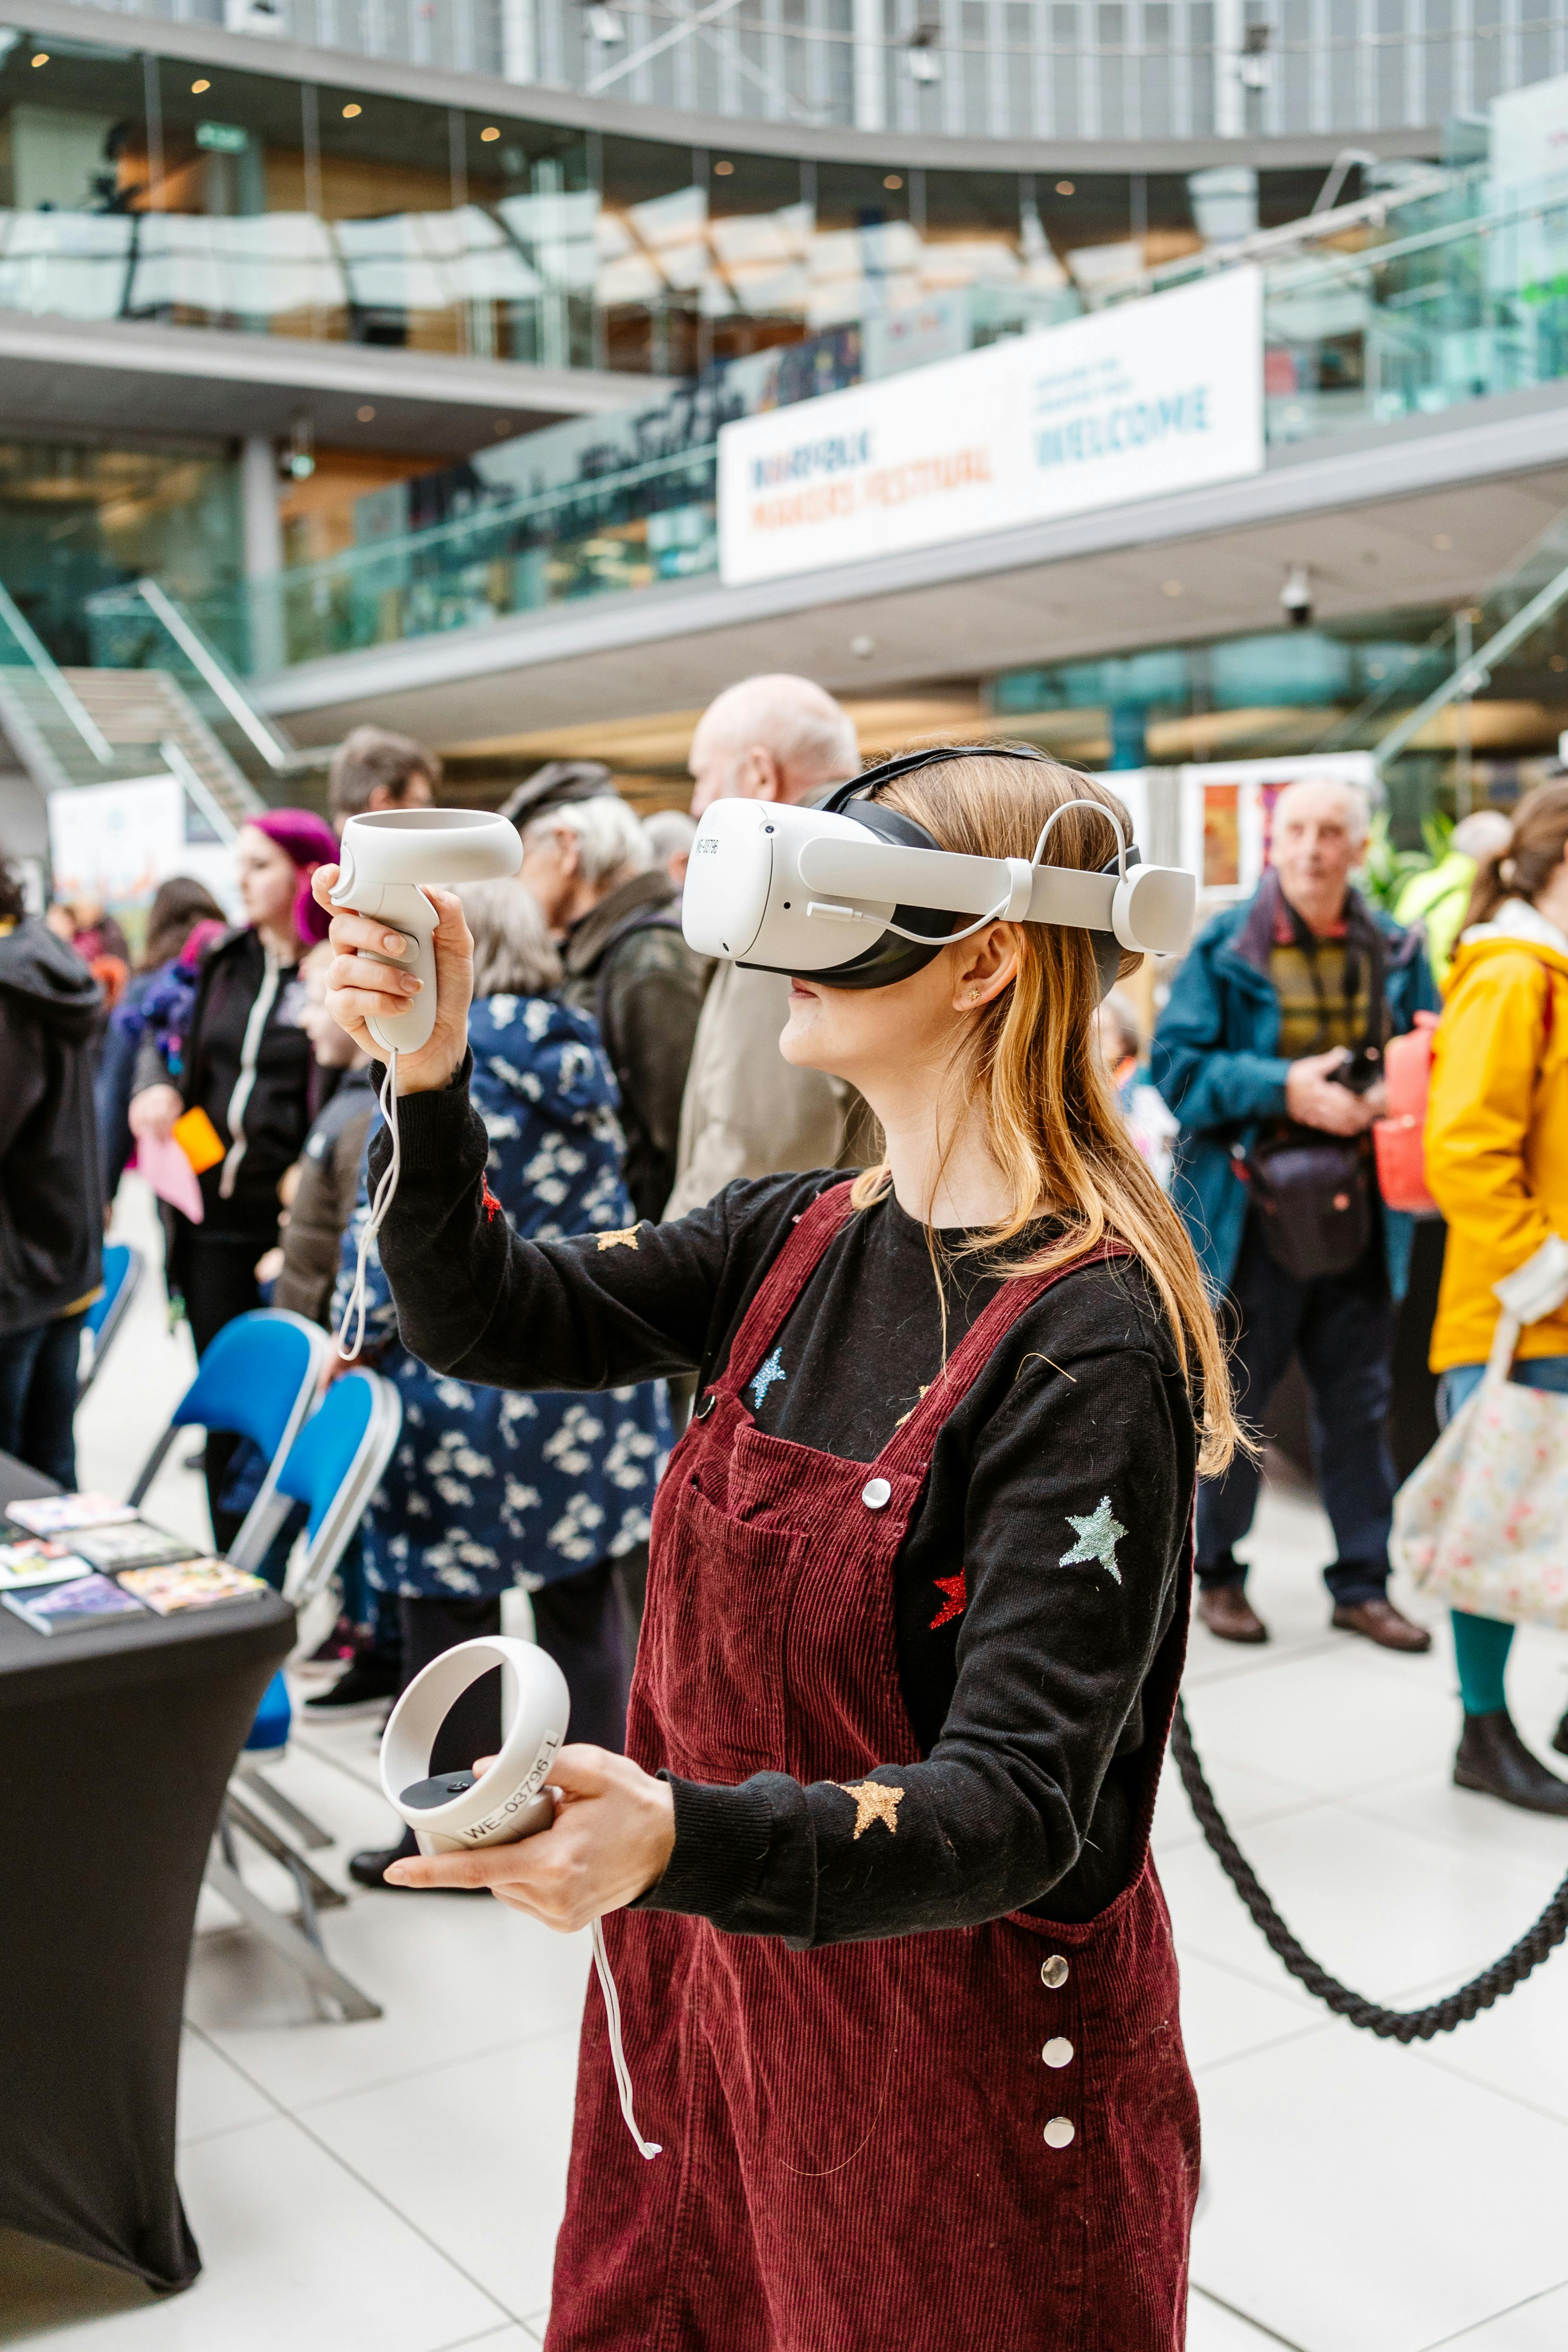 A young woman with long strawberry blonde hair wearing a VR headset